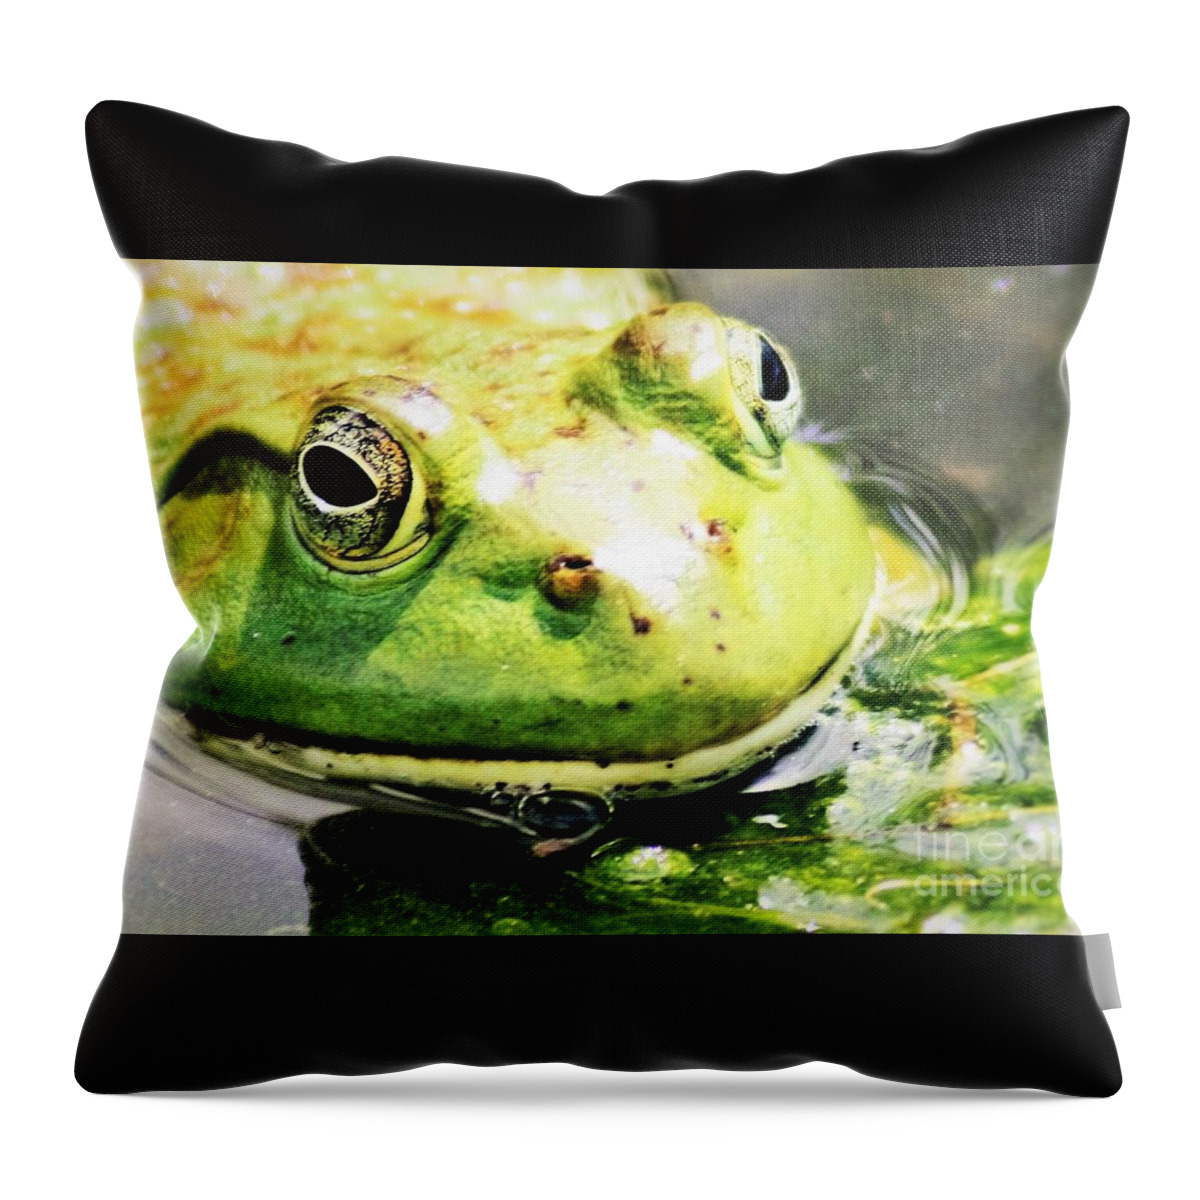 Frog Throw Pillow featuring the photograph Frog Close Up by Nick Gustafson